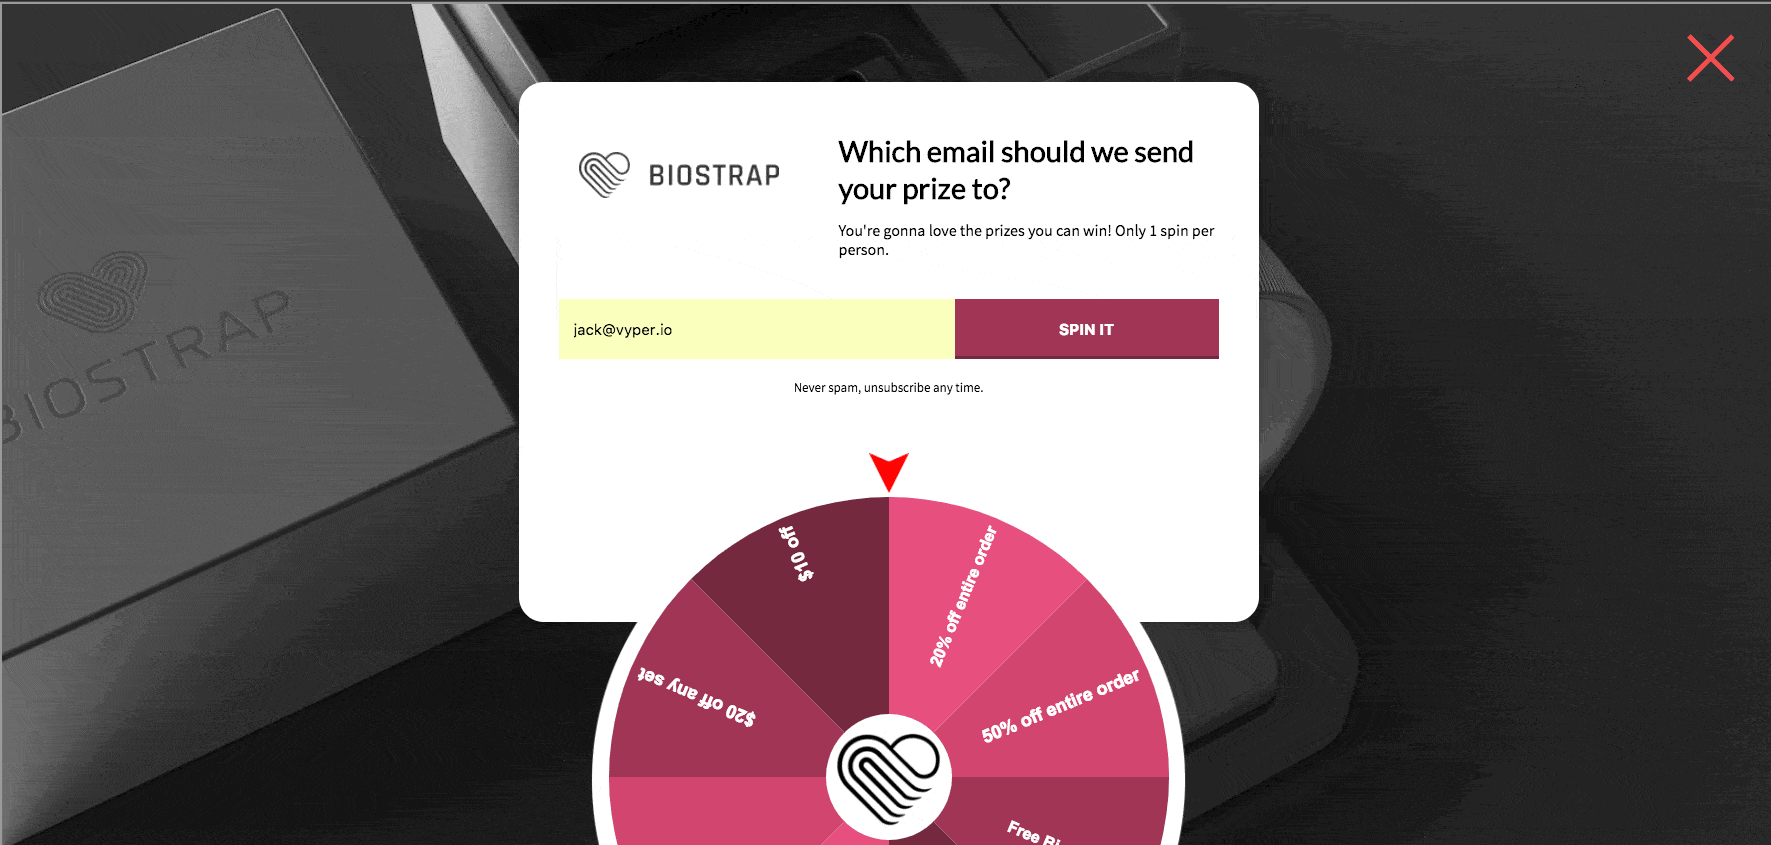 biostrap collected 25k emails in 2 months